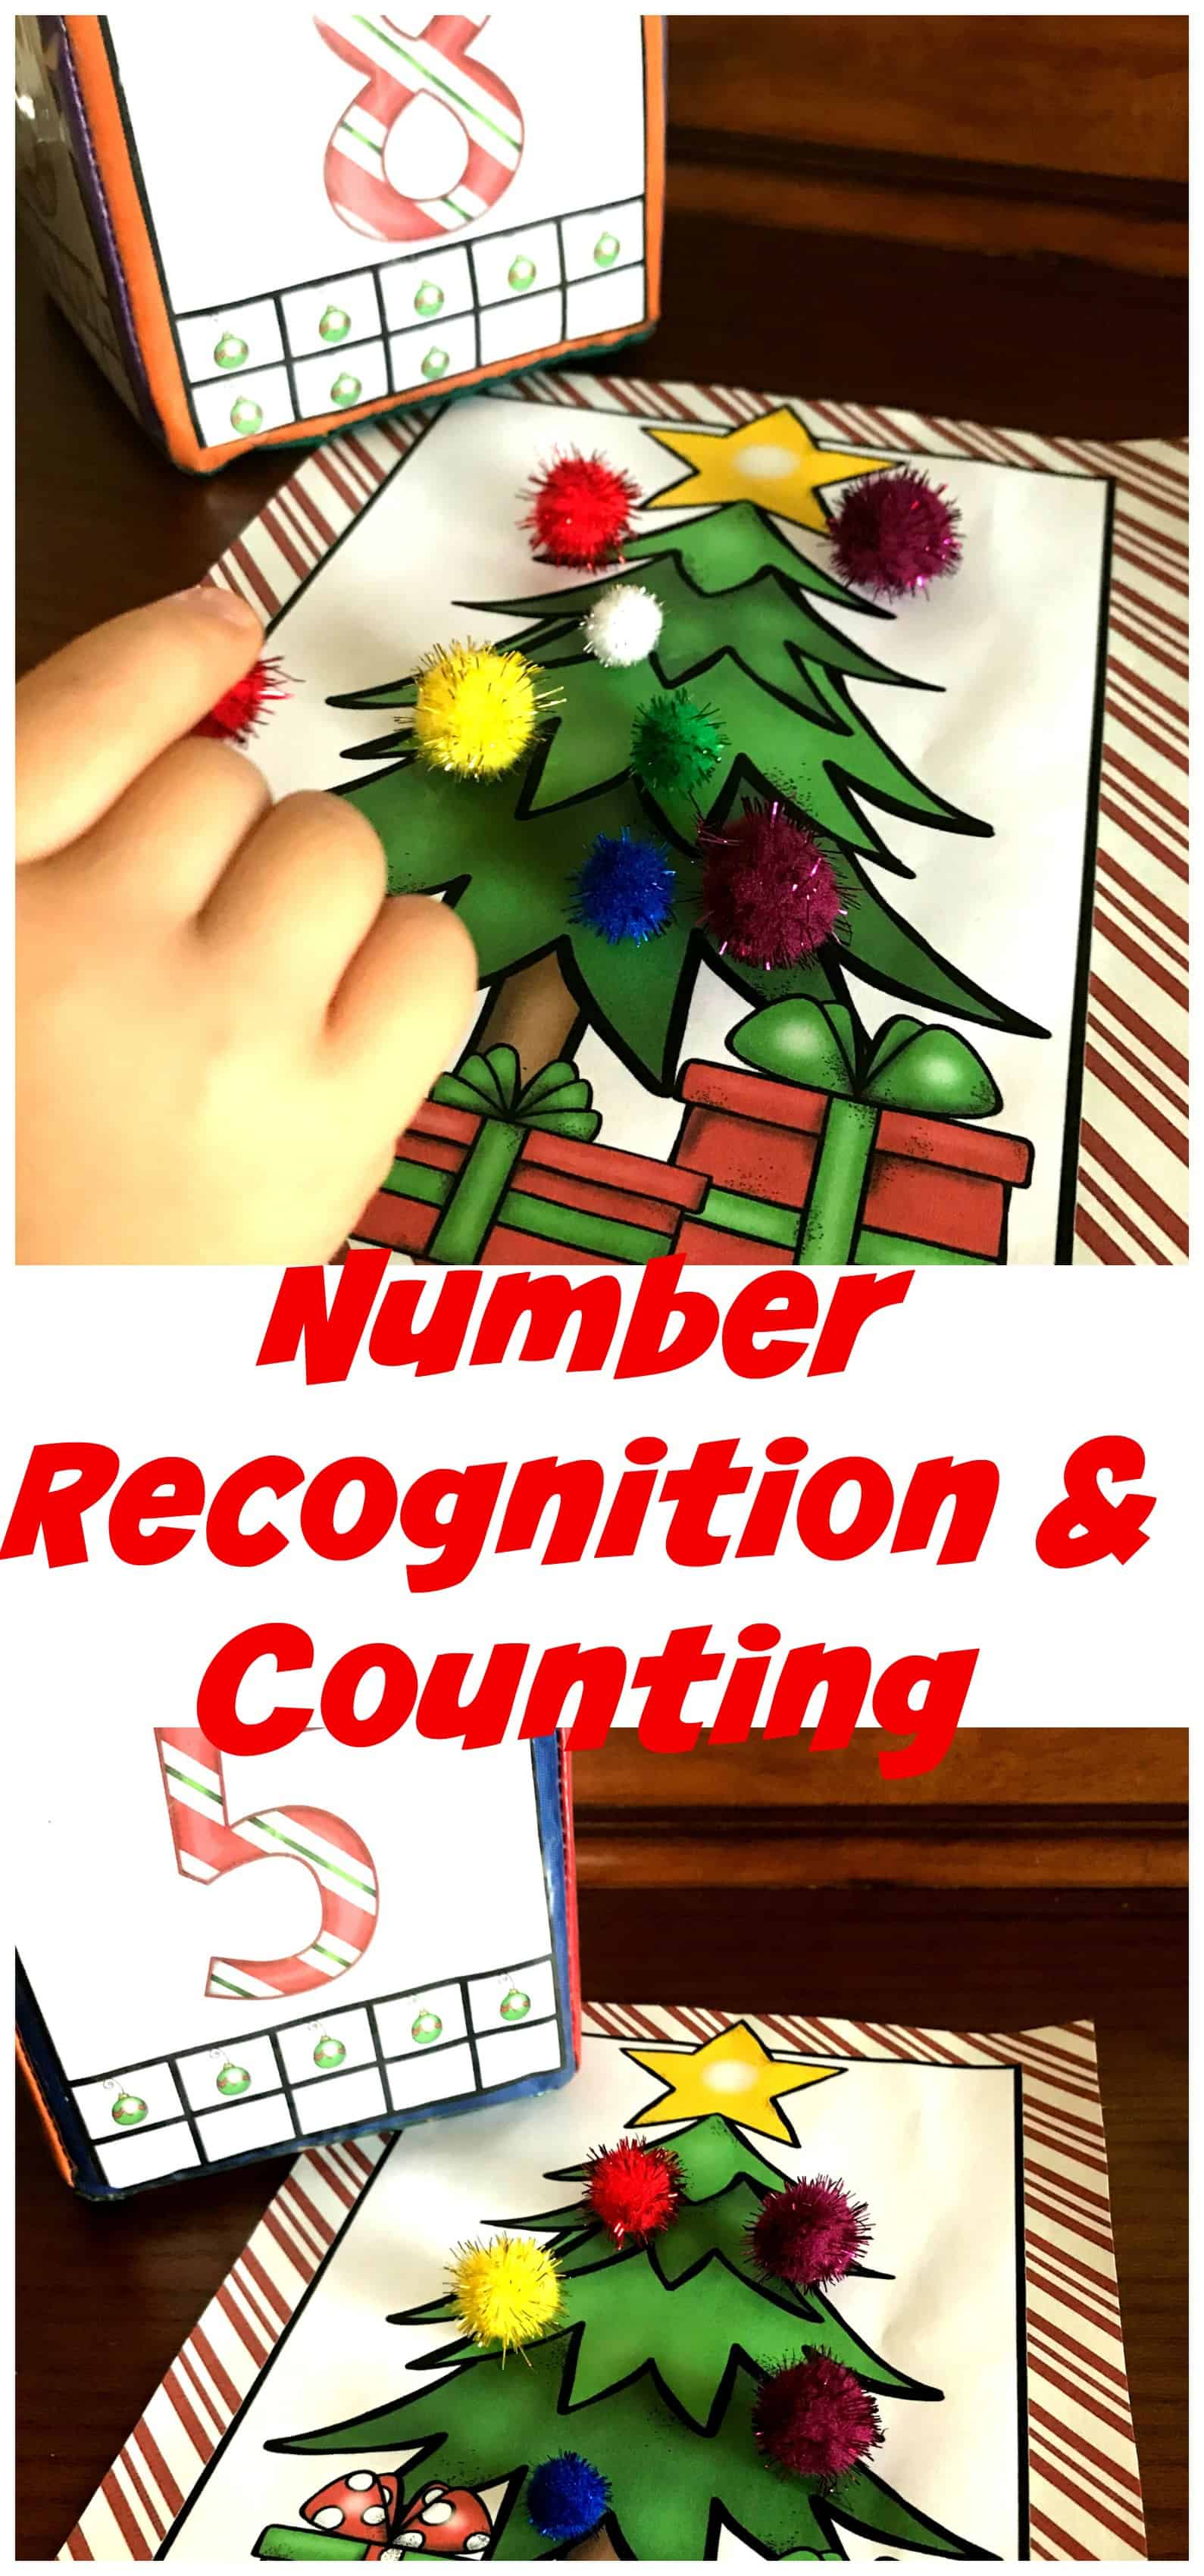 Grab this FREE Christmas themed counting activity for preschoolers. It is a fun hands-on way to work on numbers recognition and one to one correspondence.